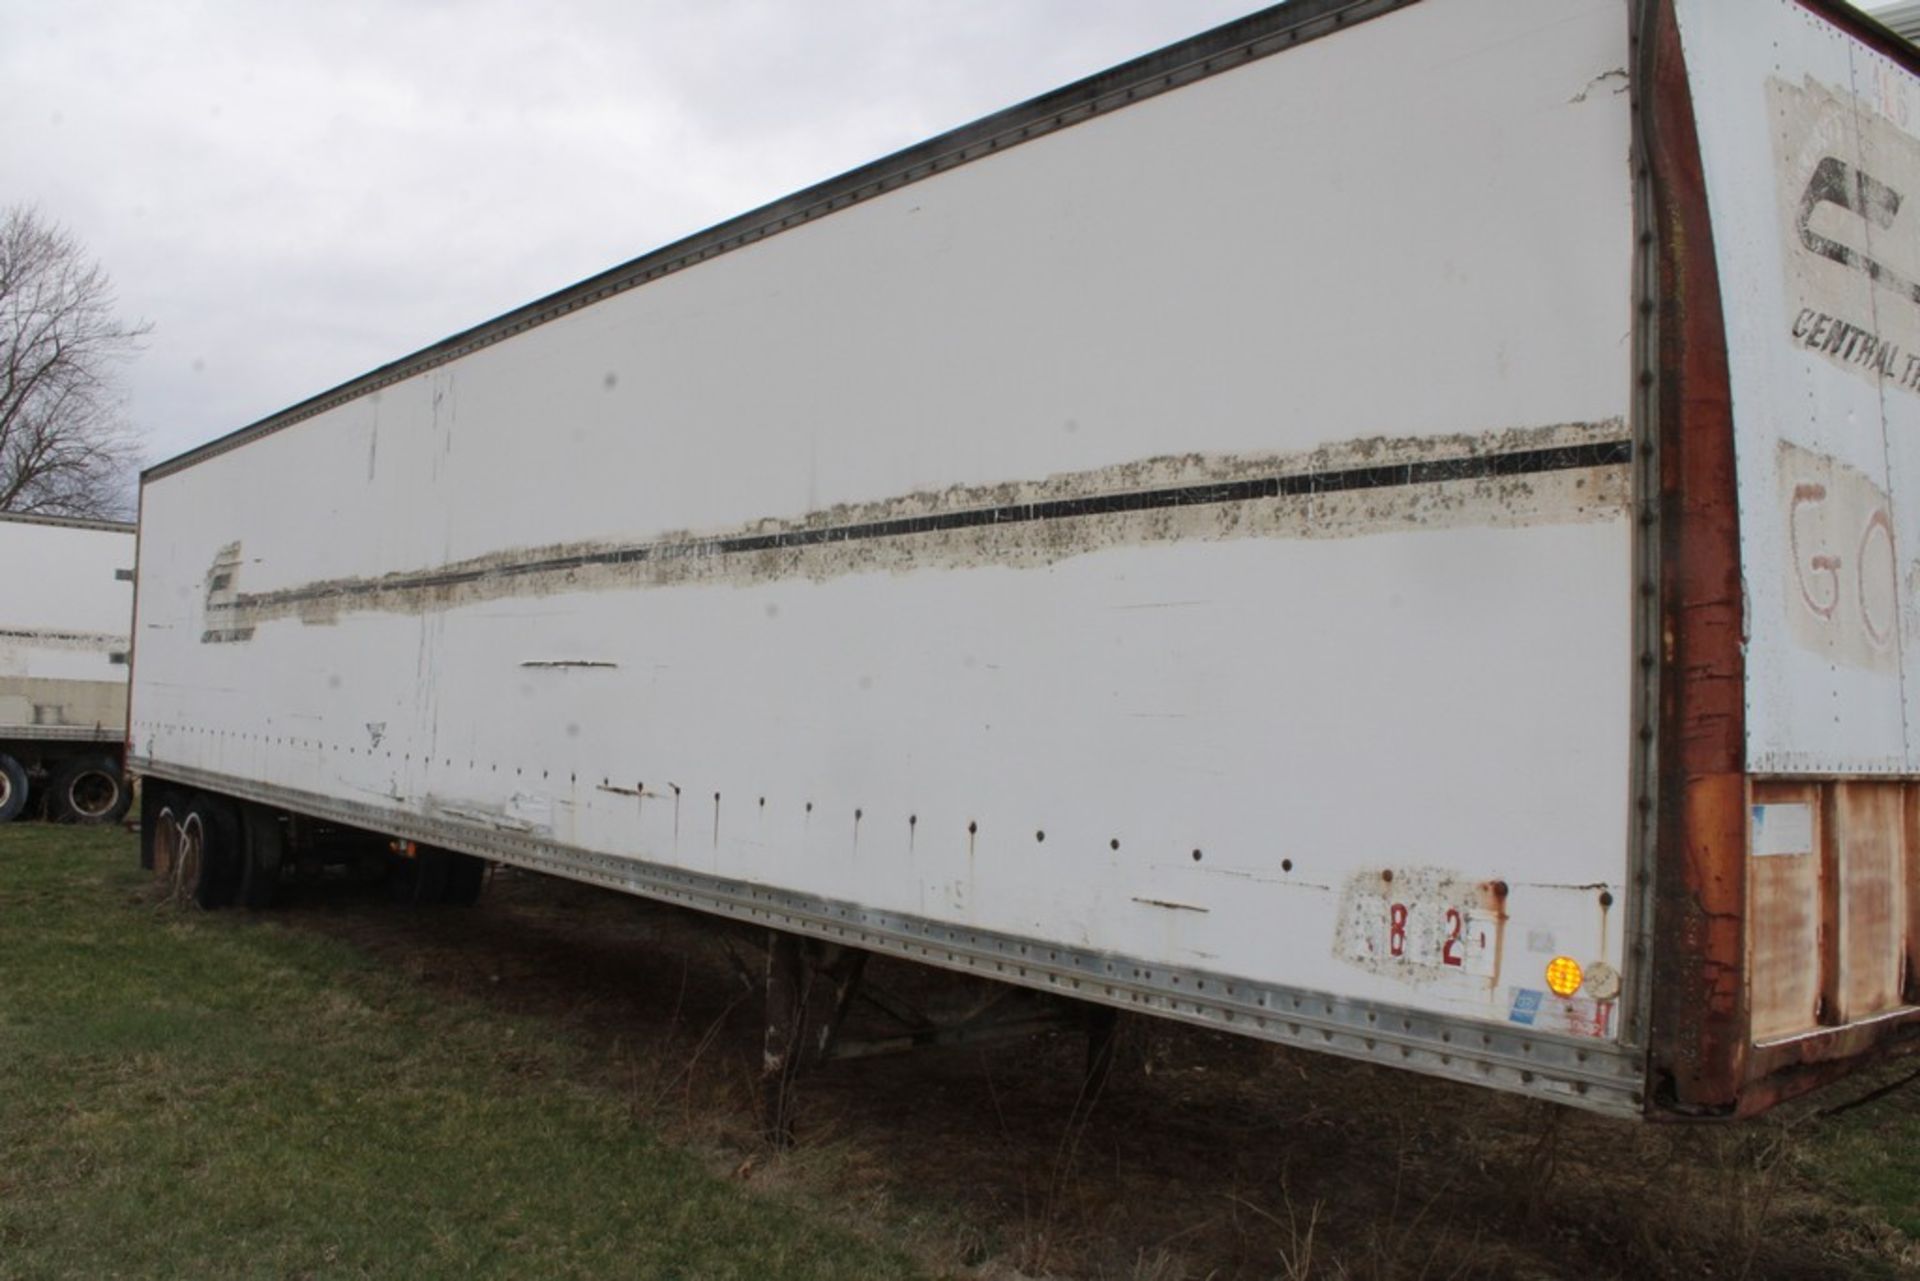 APPROX. 45’ UNIDENTIFIED ENCLOSED DRY VAN TRAILER - Image 2 of 4